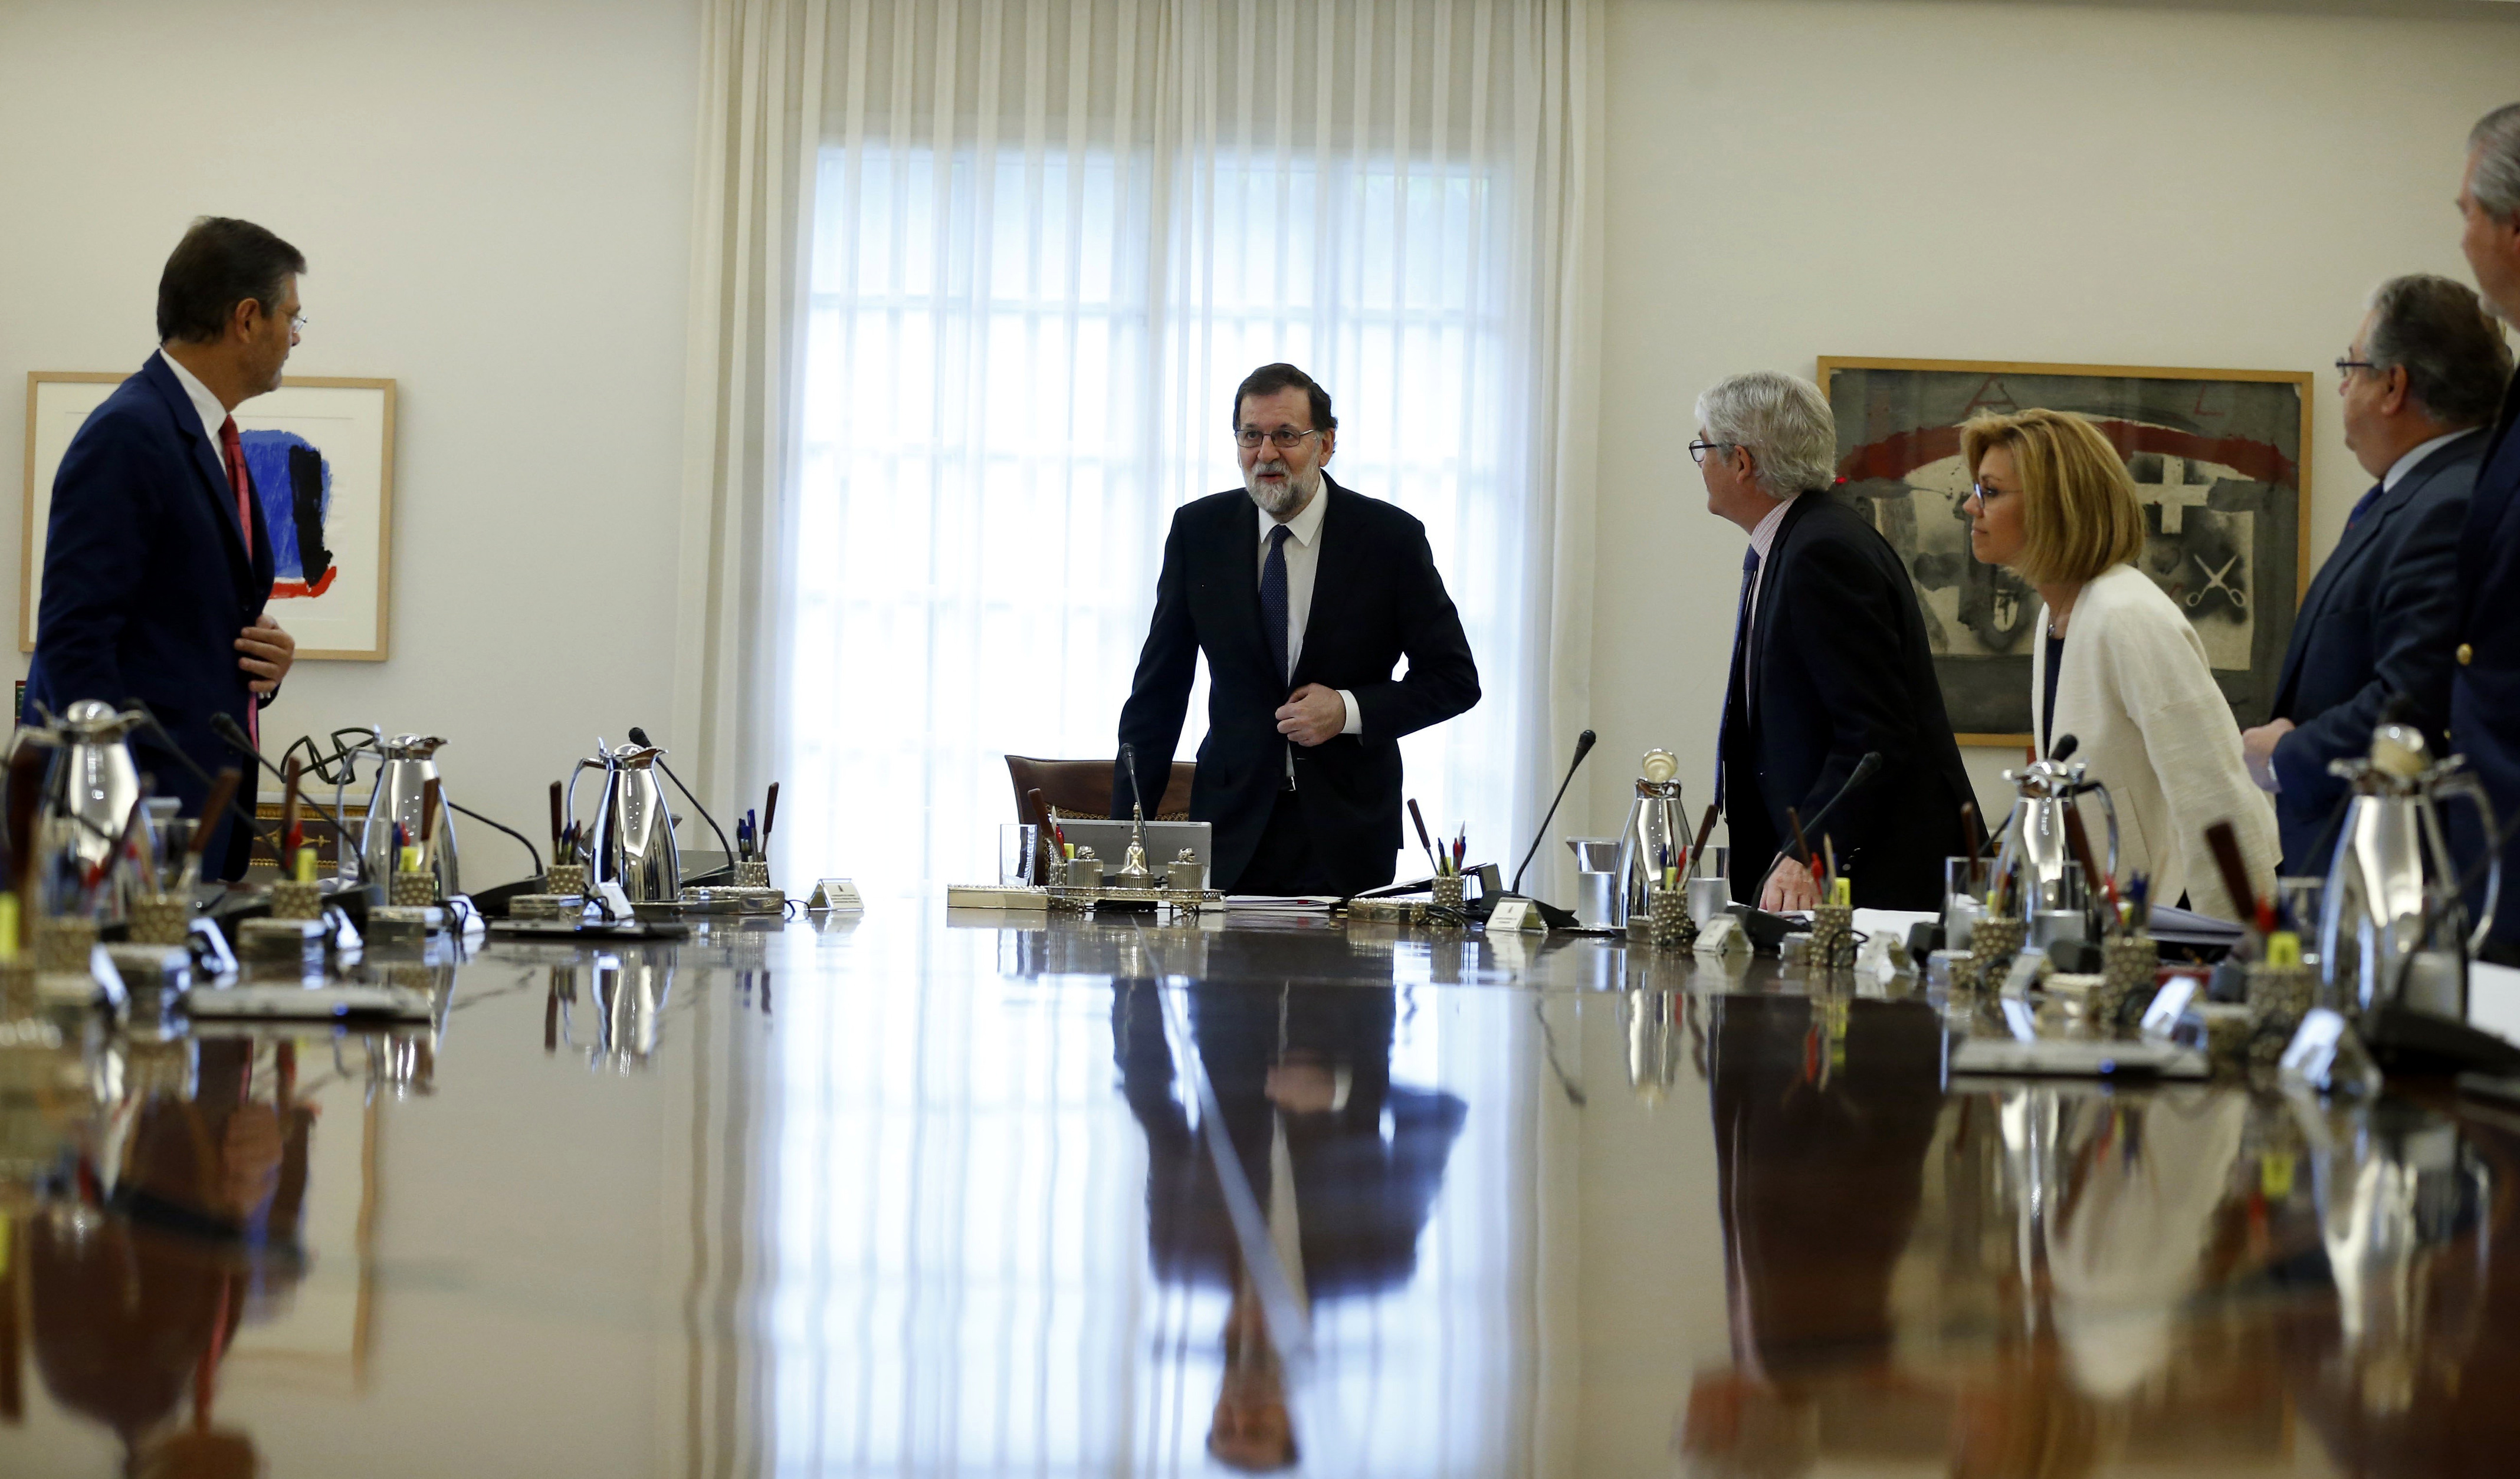 Spanish president Mariano Rajoy meeting with officials to discuss fate of Catalonia (by ACN)